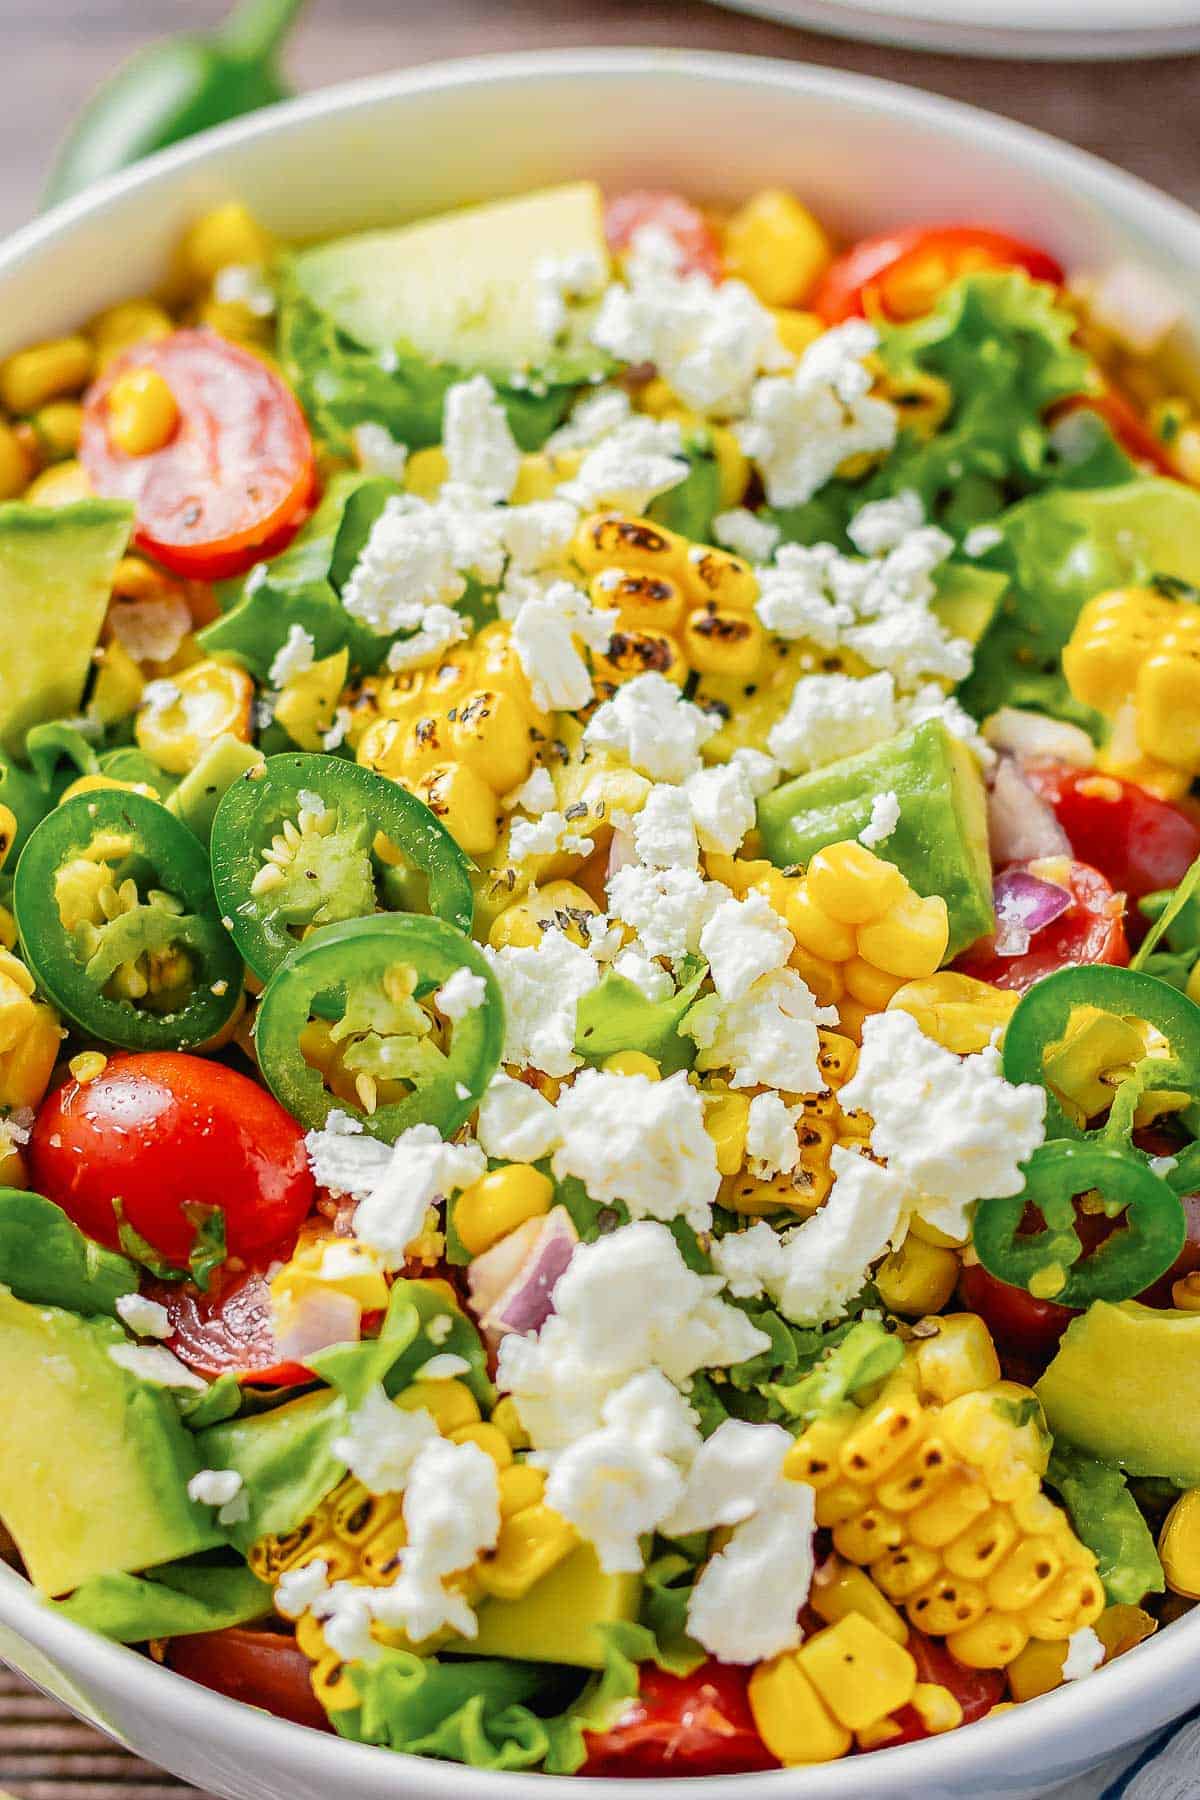 close up shot of a grilled corn salad with lettuce, avocado, tomatoes, onion in a white bowl on a wooden table